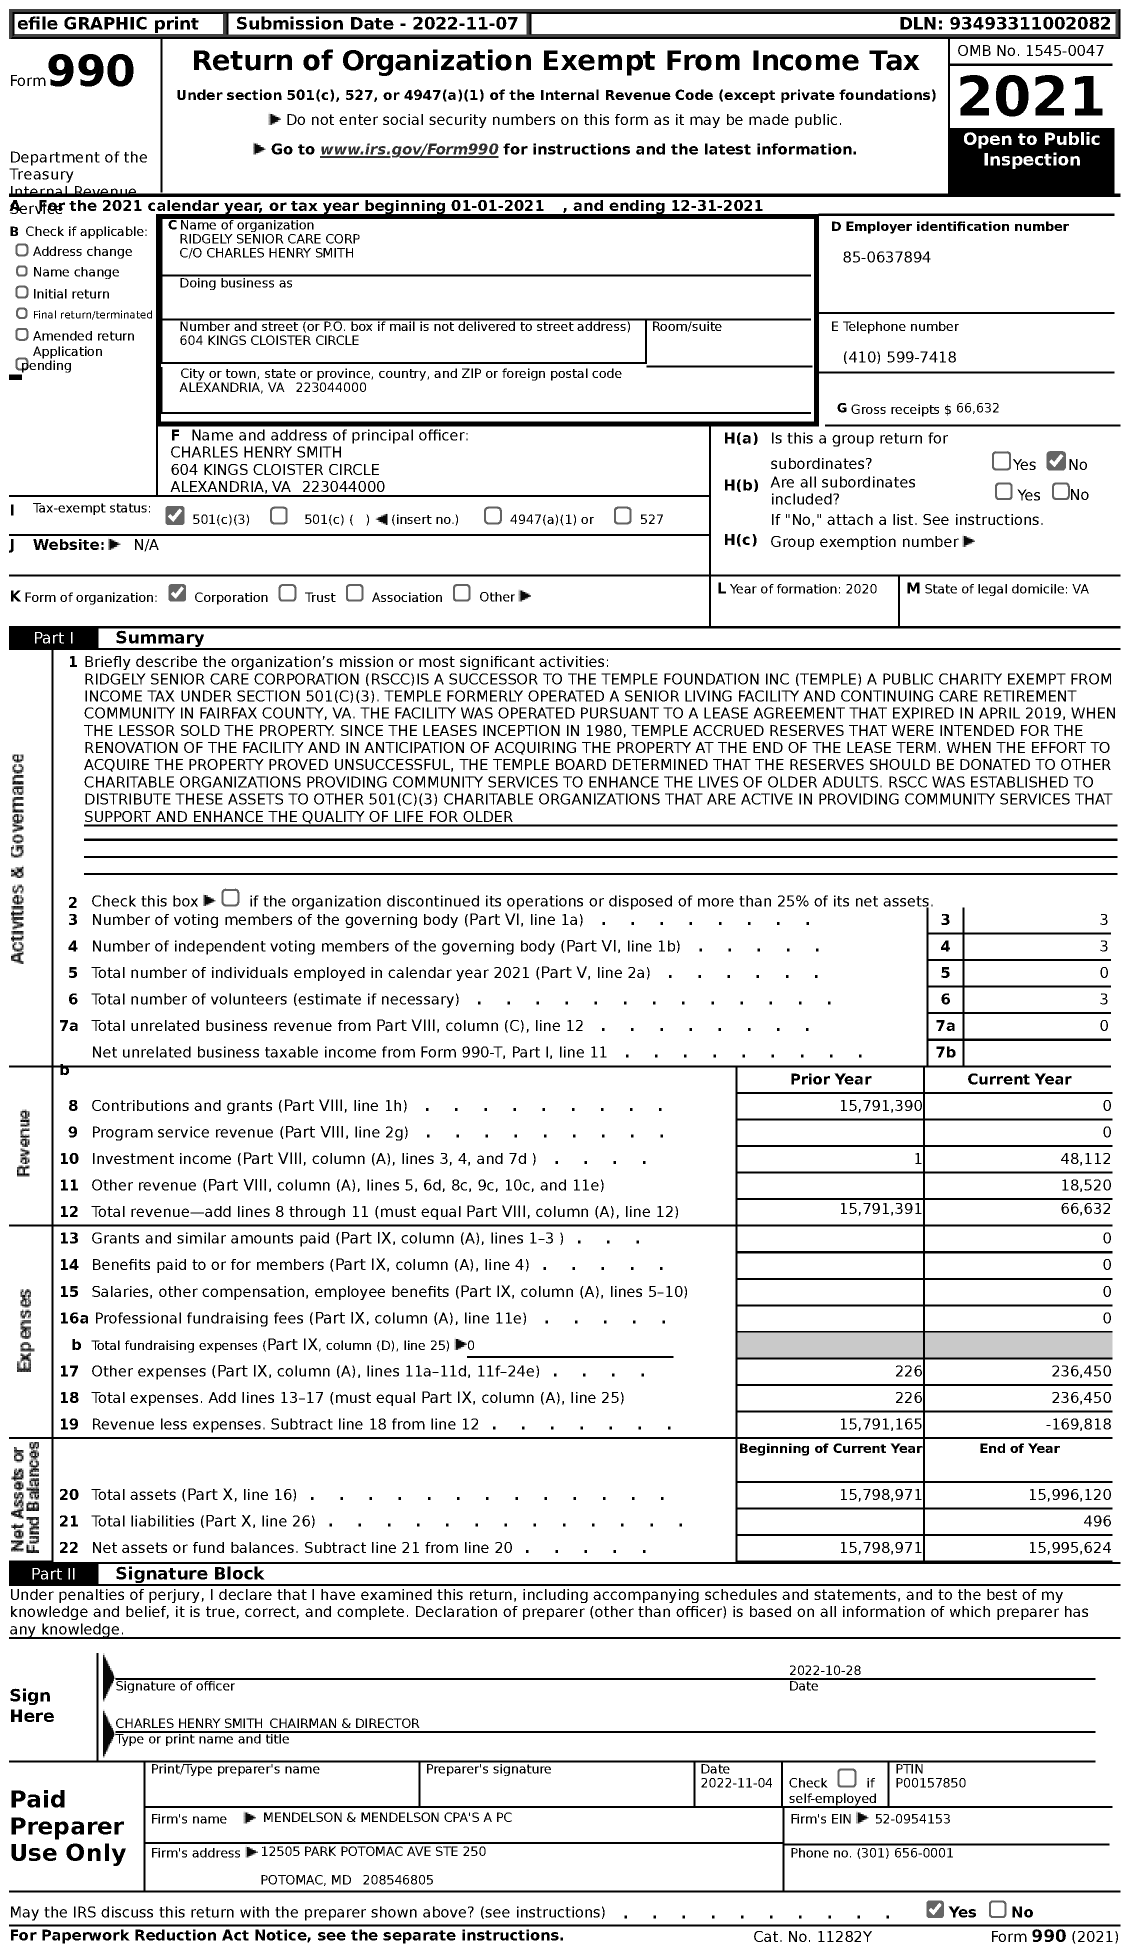 Image of first page of 2021 Form 990 for Ridgely Senior Care Corporation